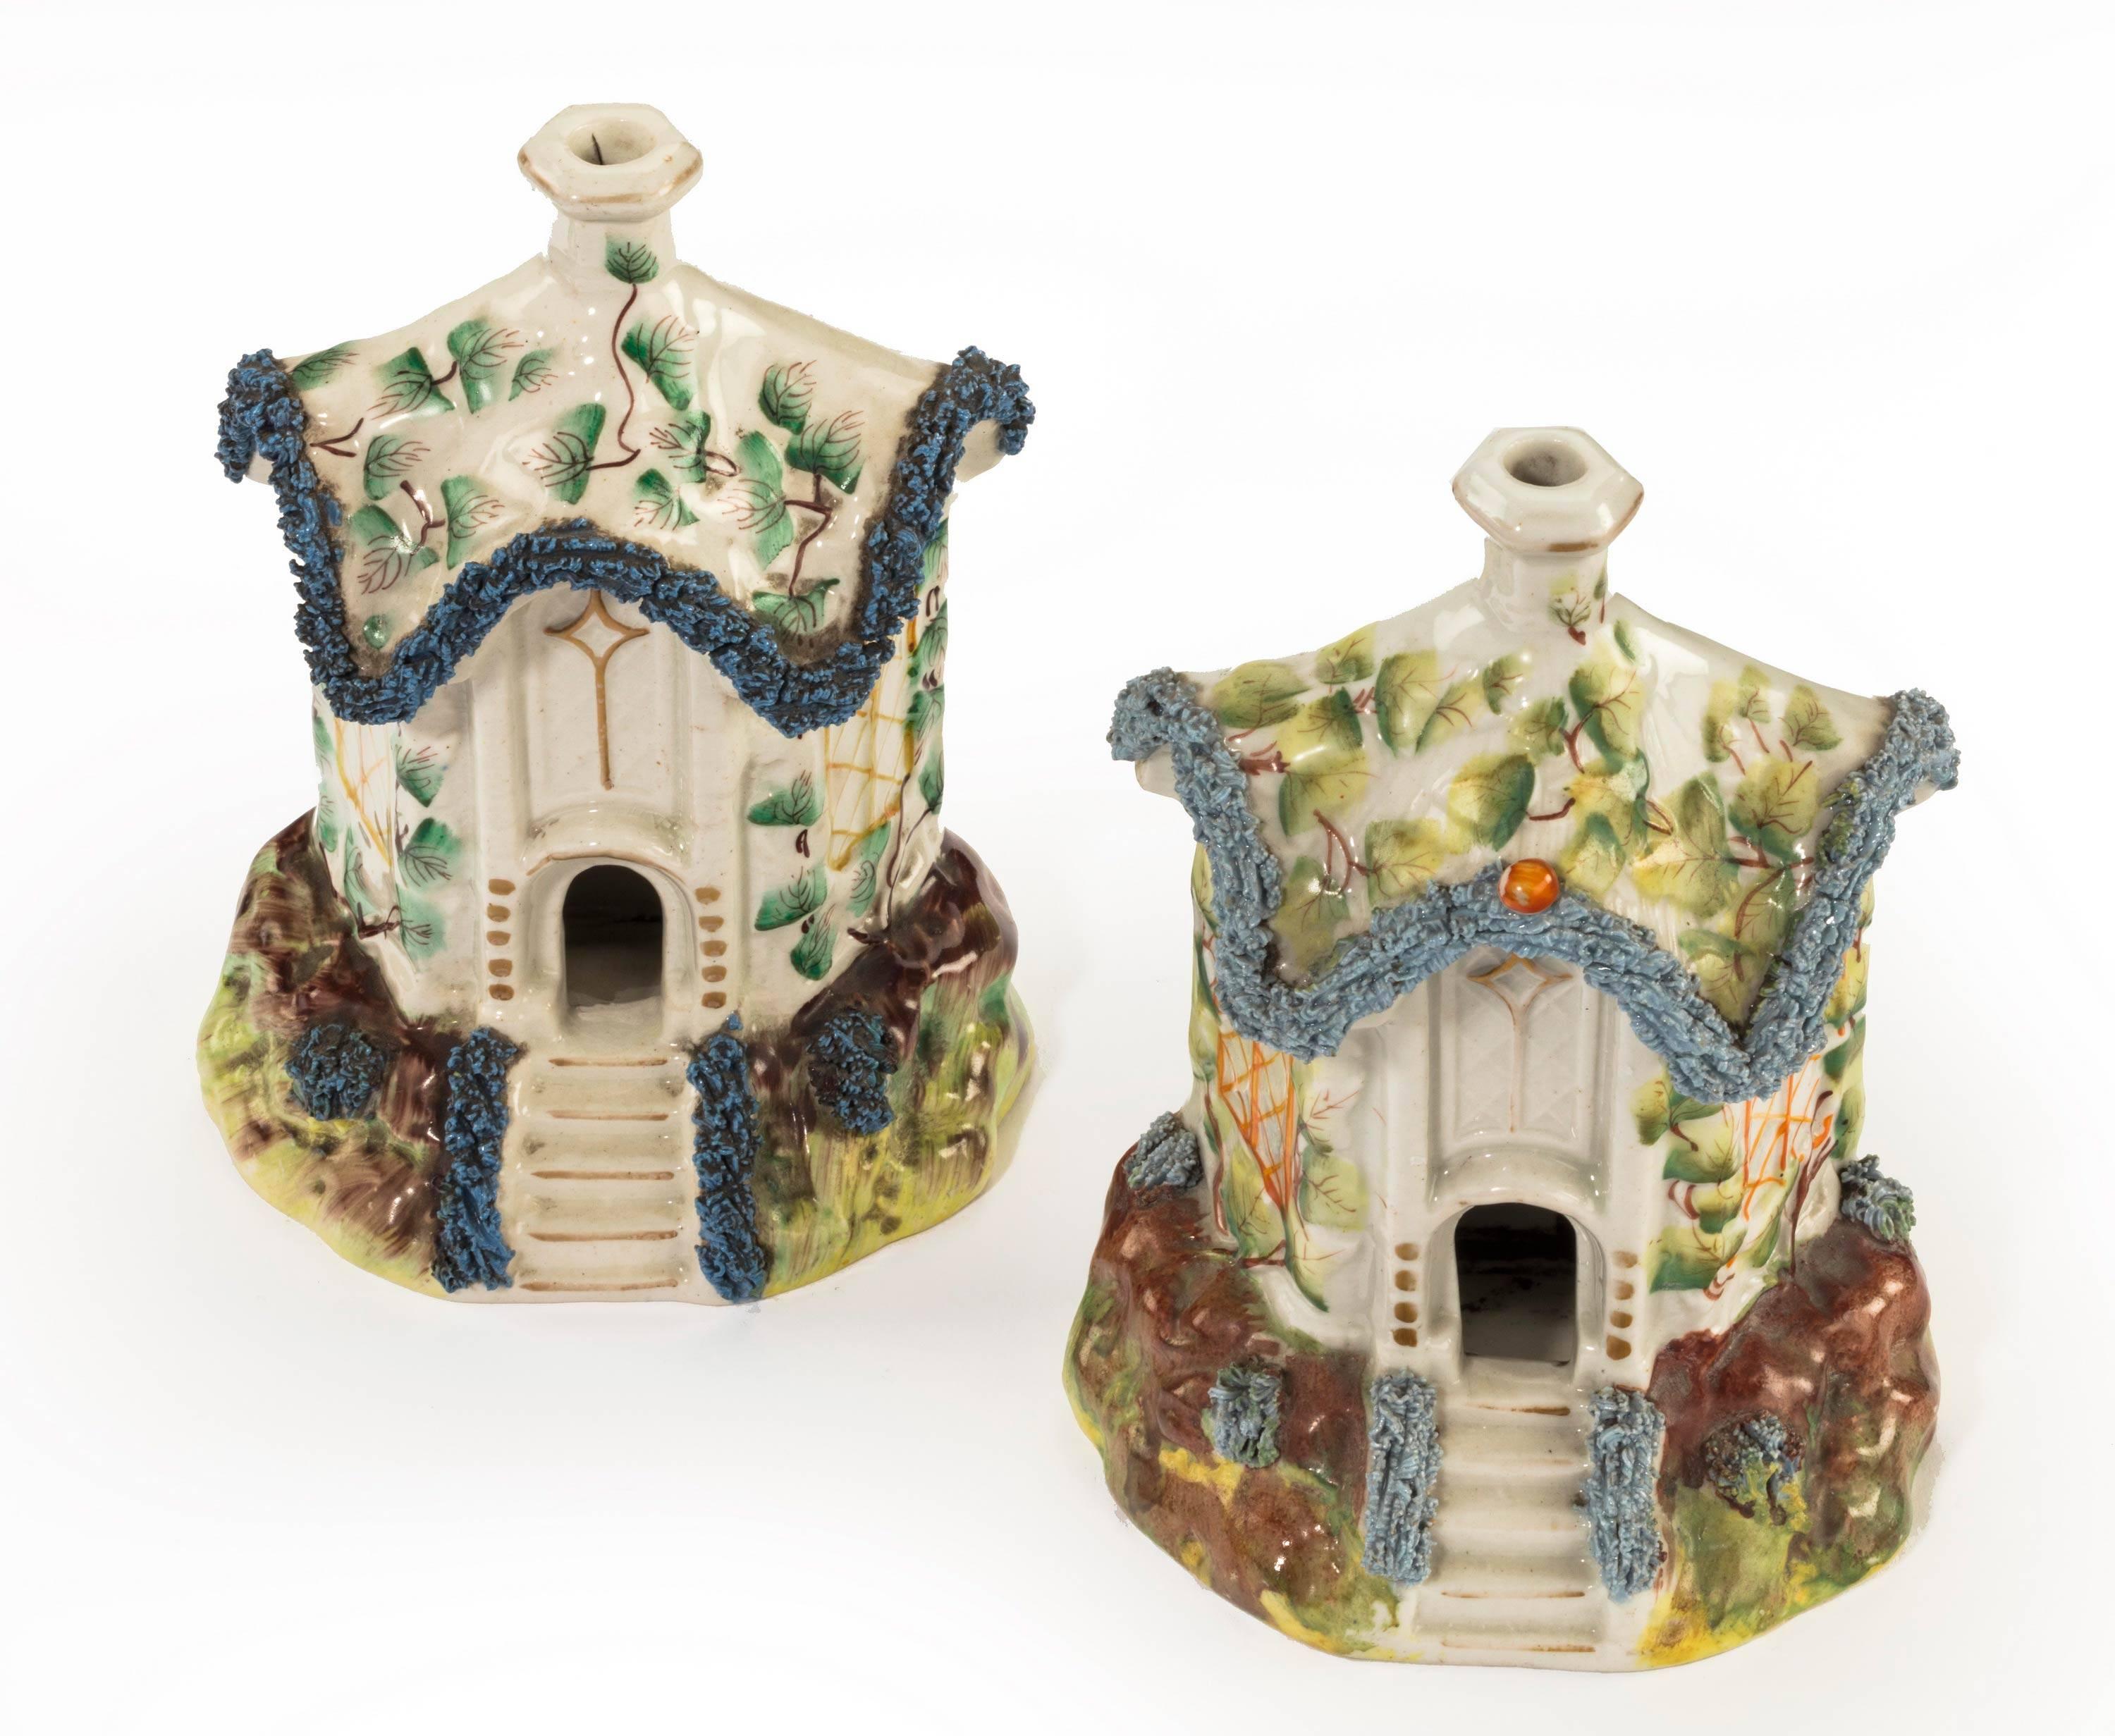 A most unusual pair of Staffordshire pottery pastille burner in the form of houses. With bocarge to the roof edgings. Excellent overall condition. Minor variation in the decorations.

The smaller:

Height 6 inches
Width 4 inches
Depth 2.75